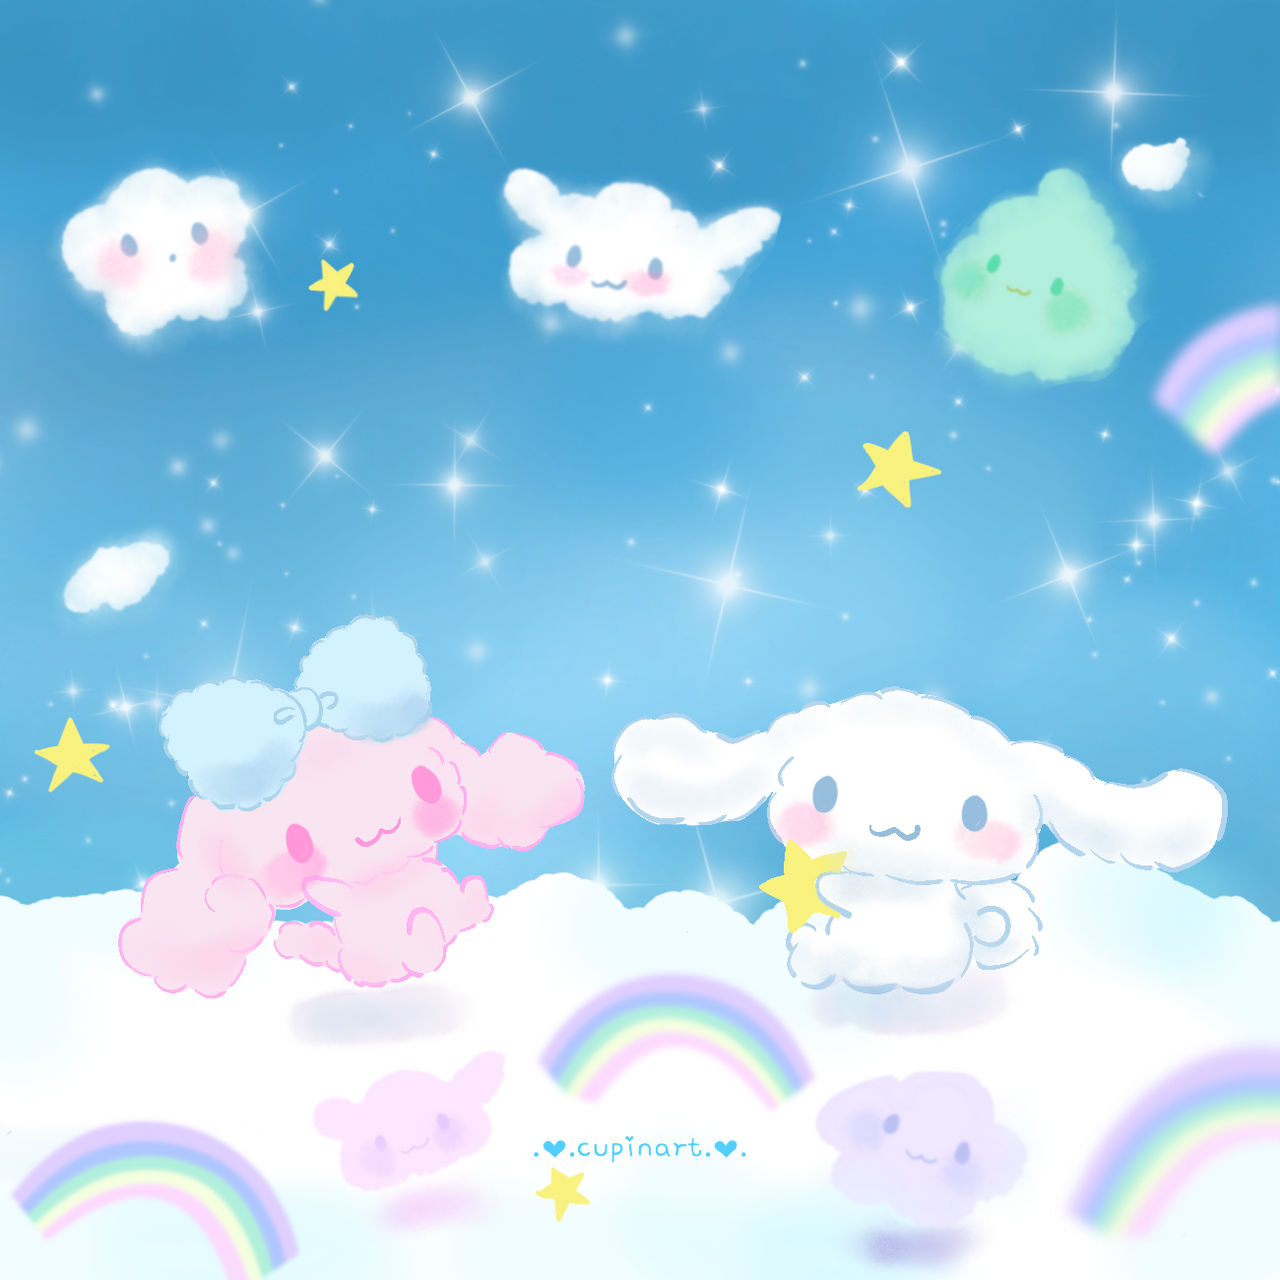 Cinnamoroll and Poron - free download by cupinart on DeviantArt